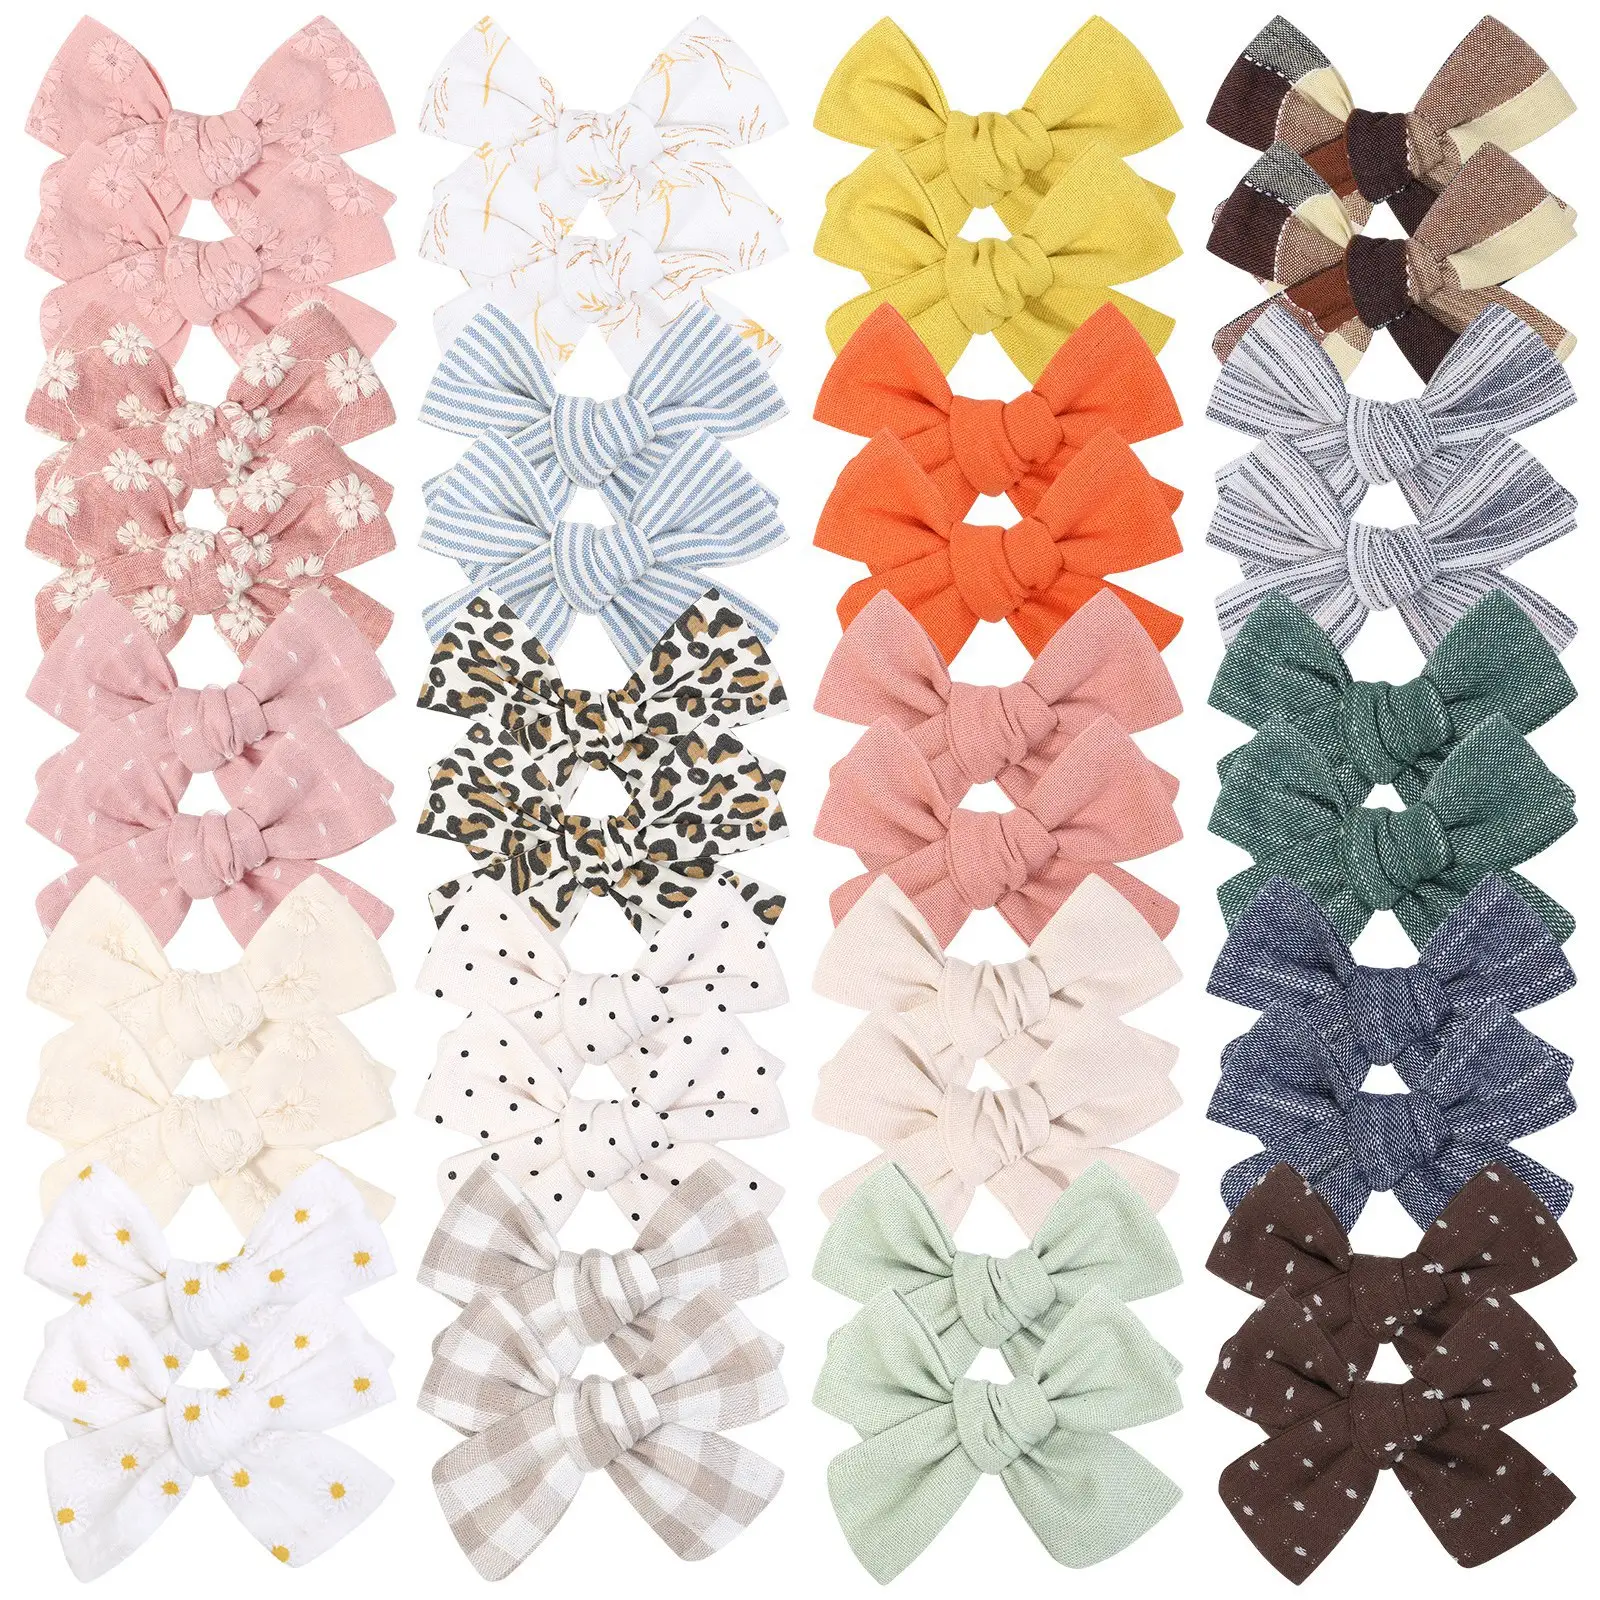 Sweet Girl Bows Little Hair Clips Barrettes Kids Hairpin Handmade Bow ricamo panno pacchetto completo tornante